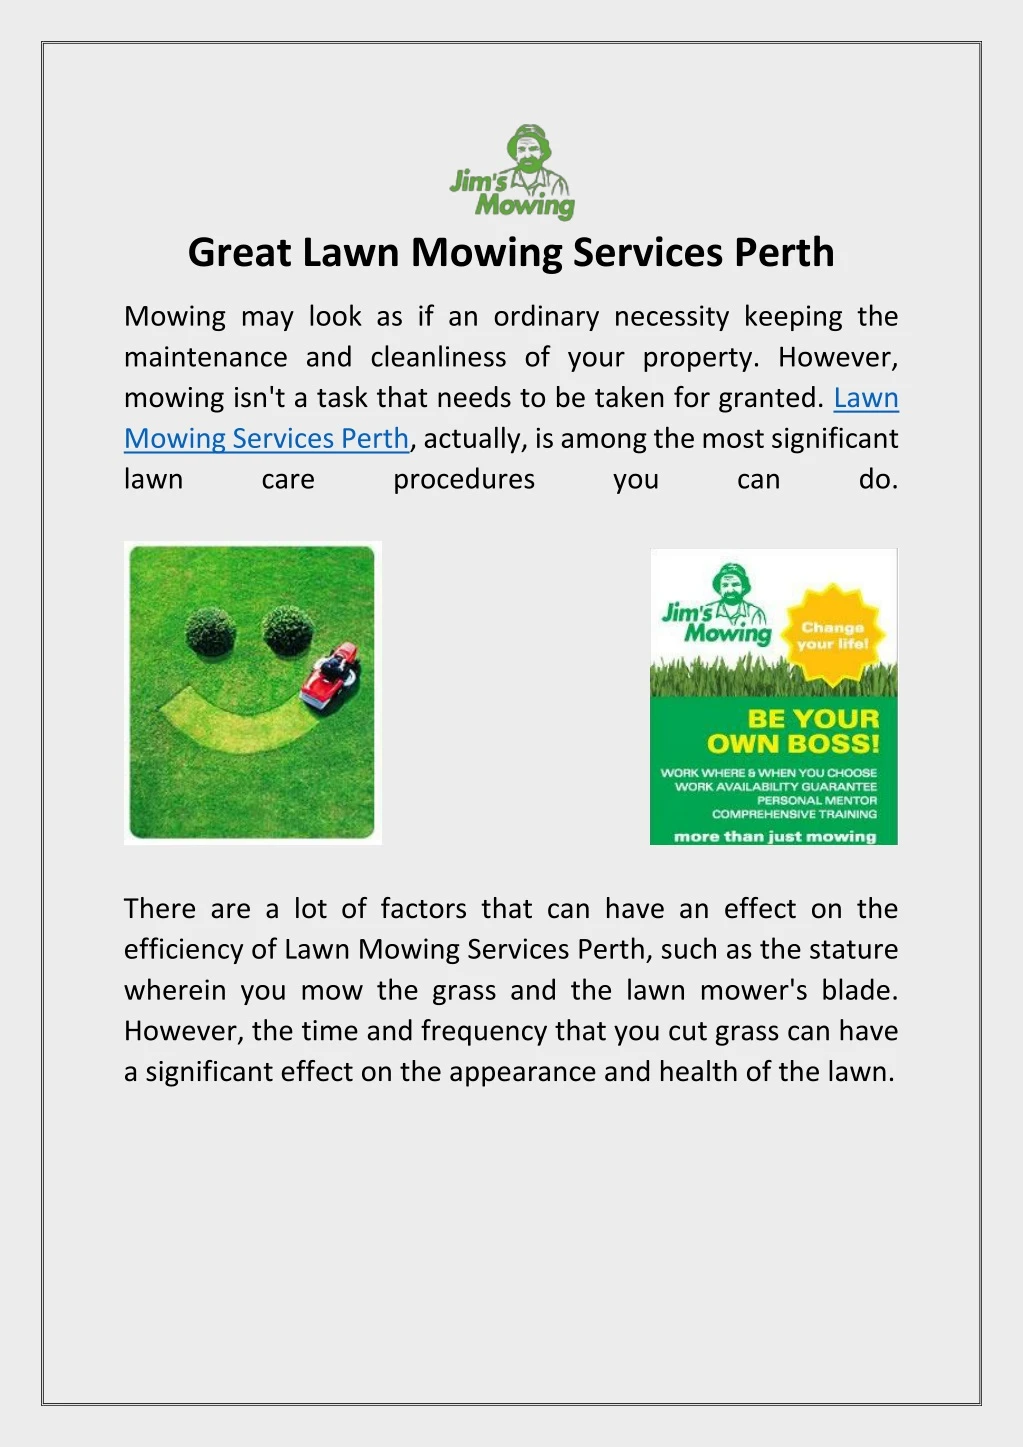 great lawn mowing services perth